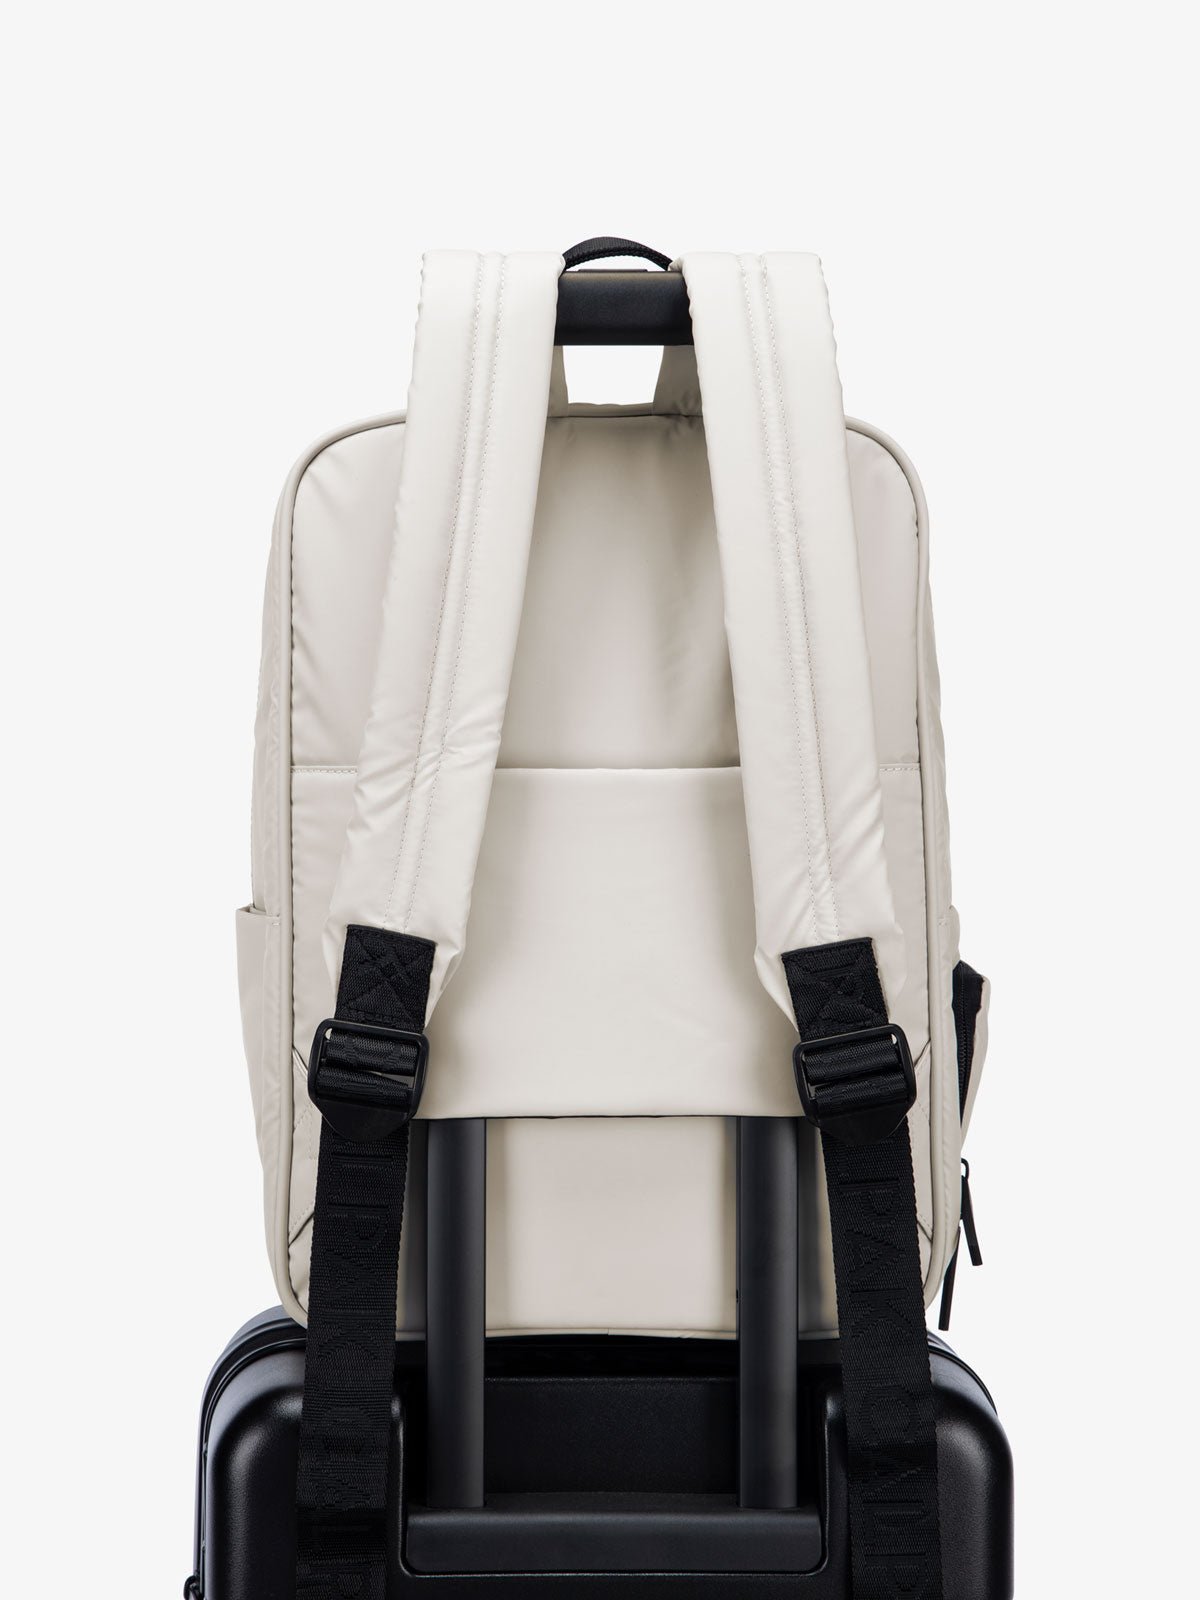 Luka Laptop Backpack with trolley luggage sleeve